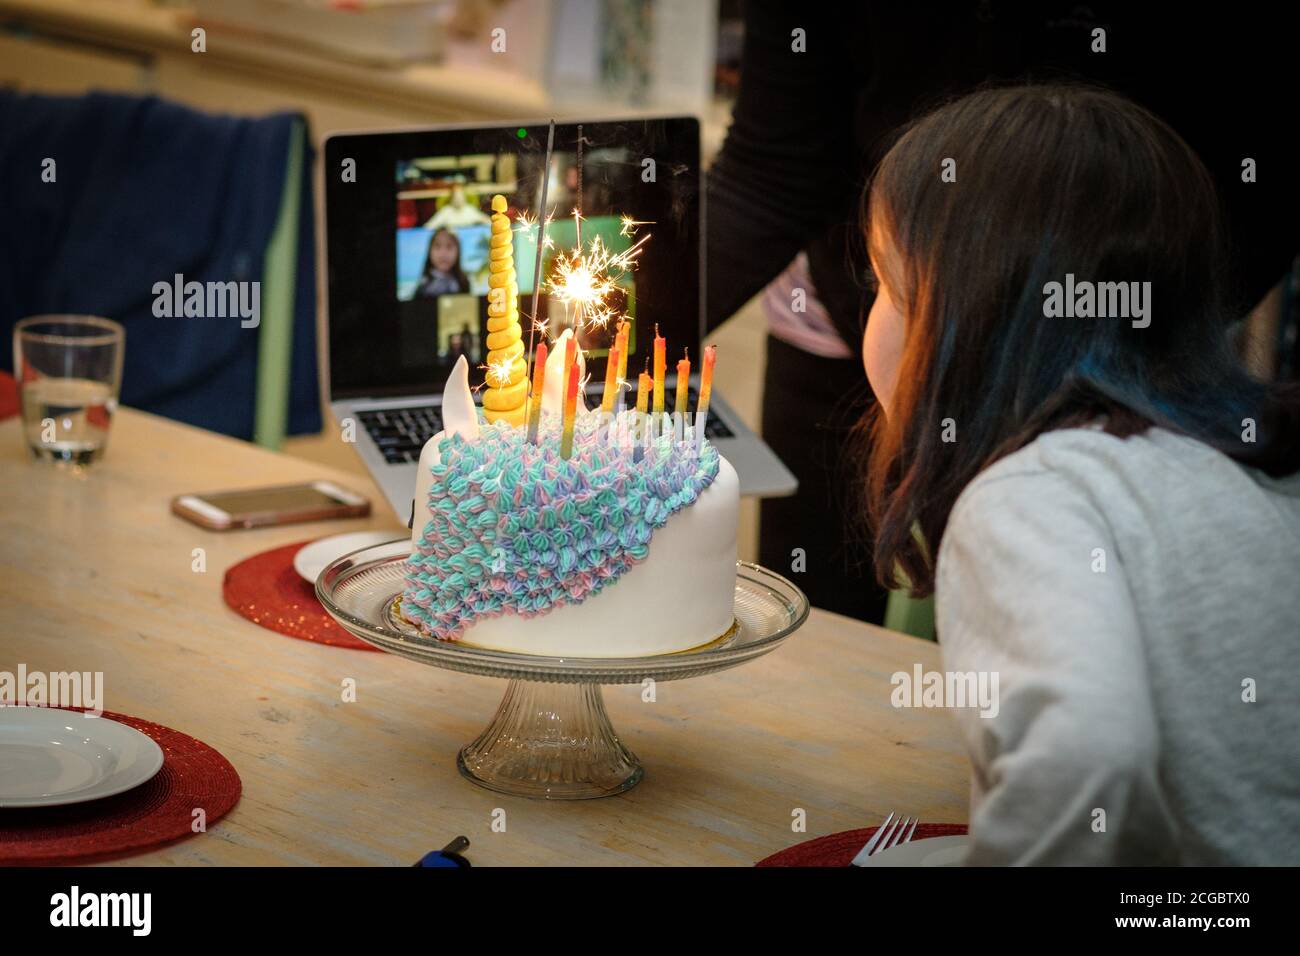 A child's Birthday party being held online (Zoom) during COVID-19 lockdown, Melbourne Australia Stock Photo